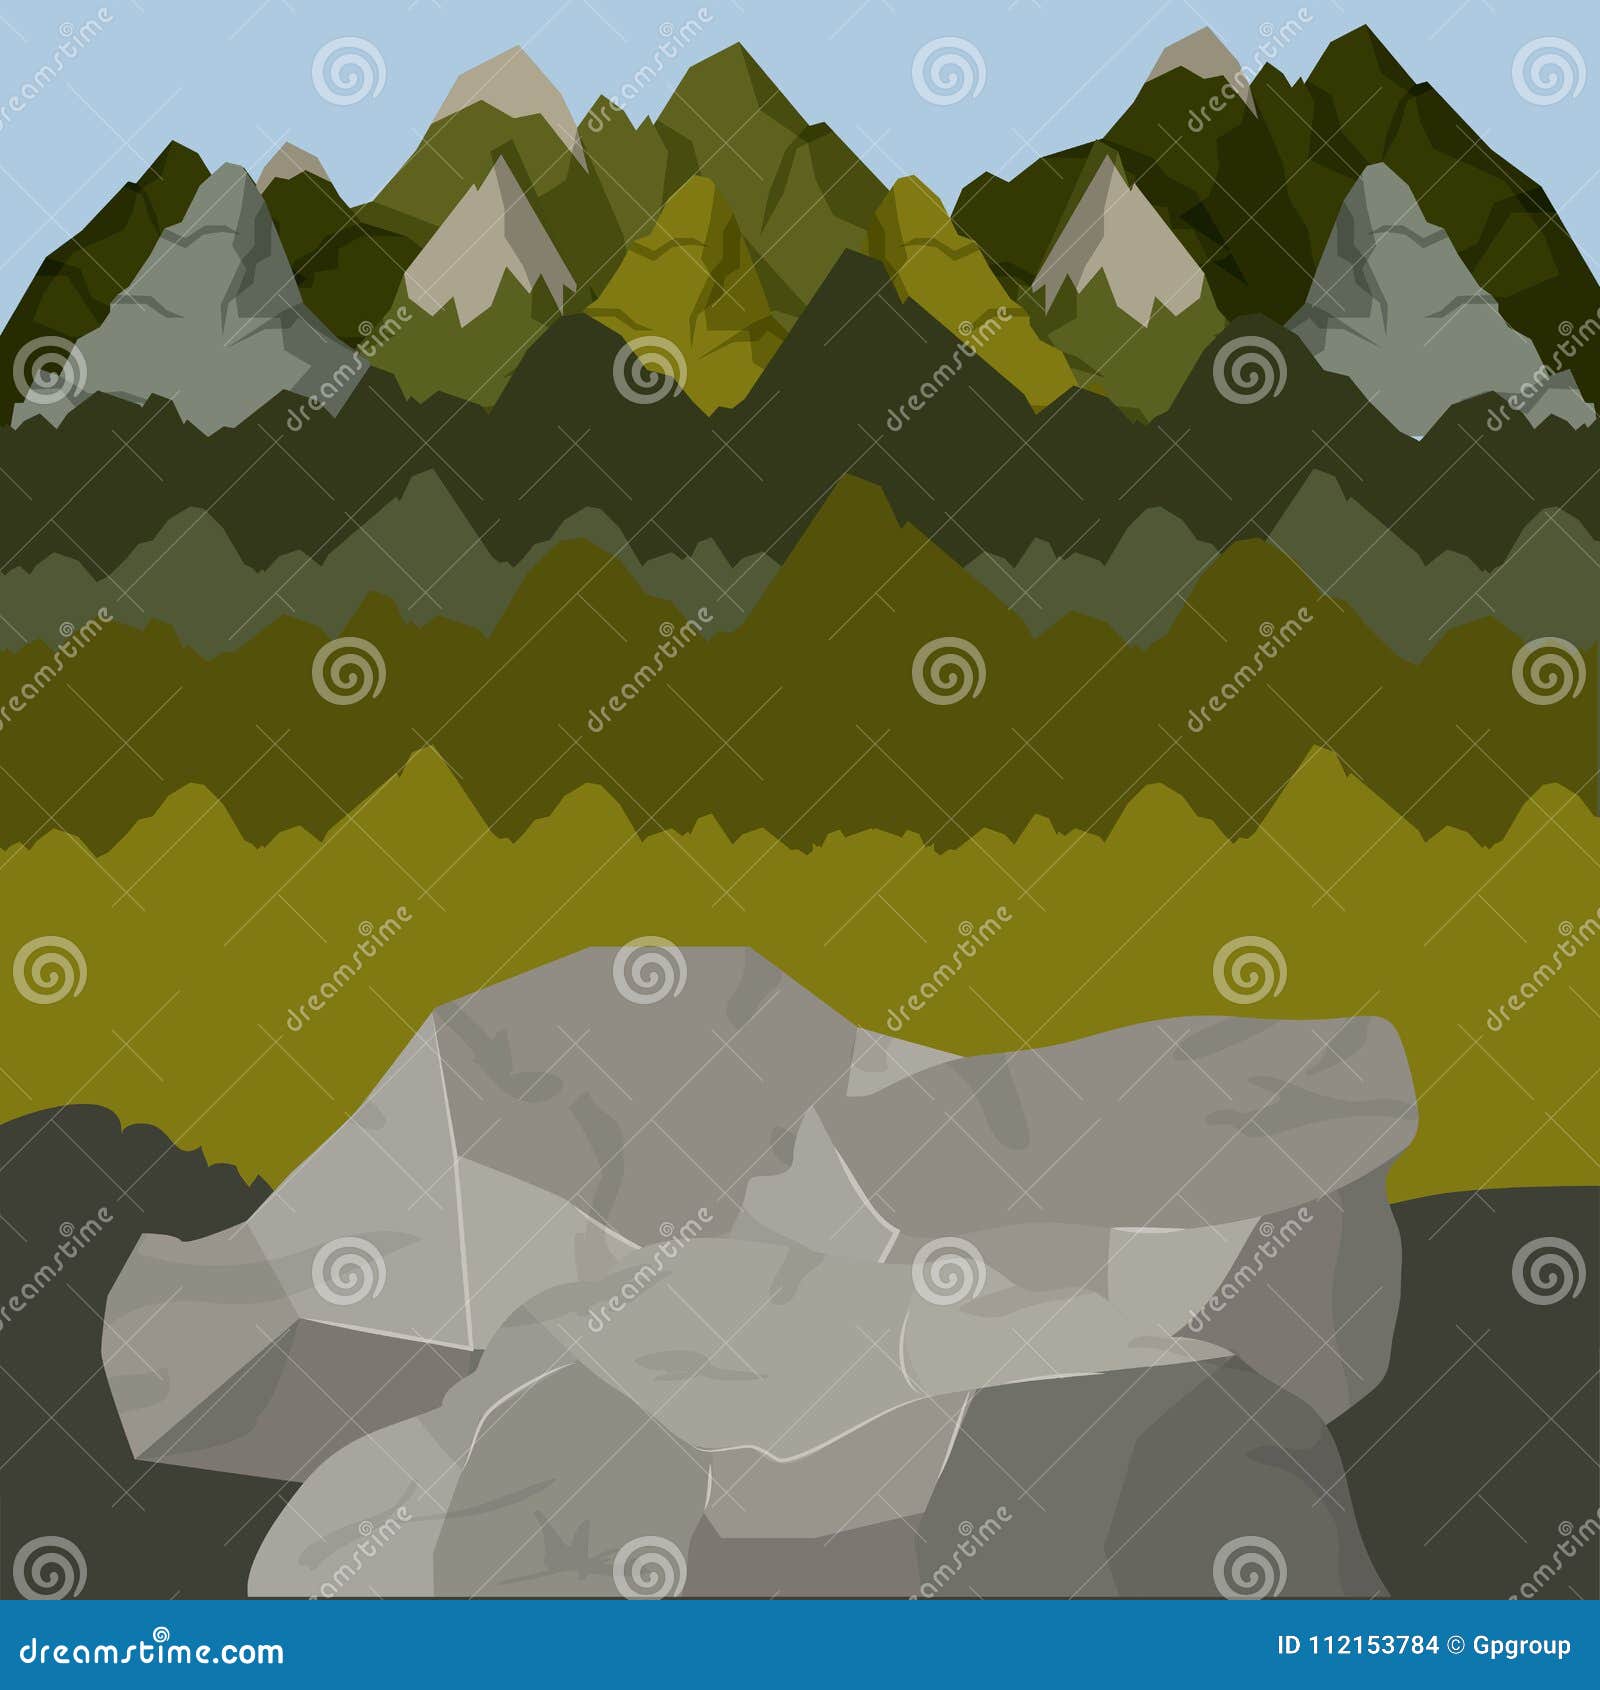 background outside forest scenary with high mountains and rocks